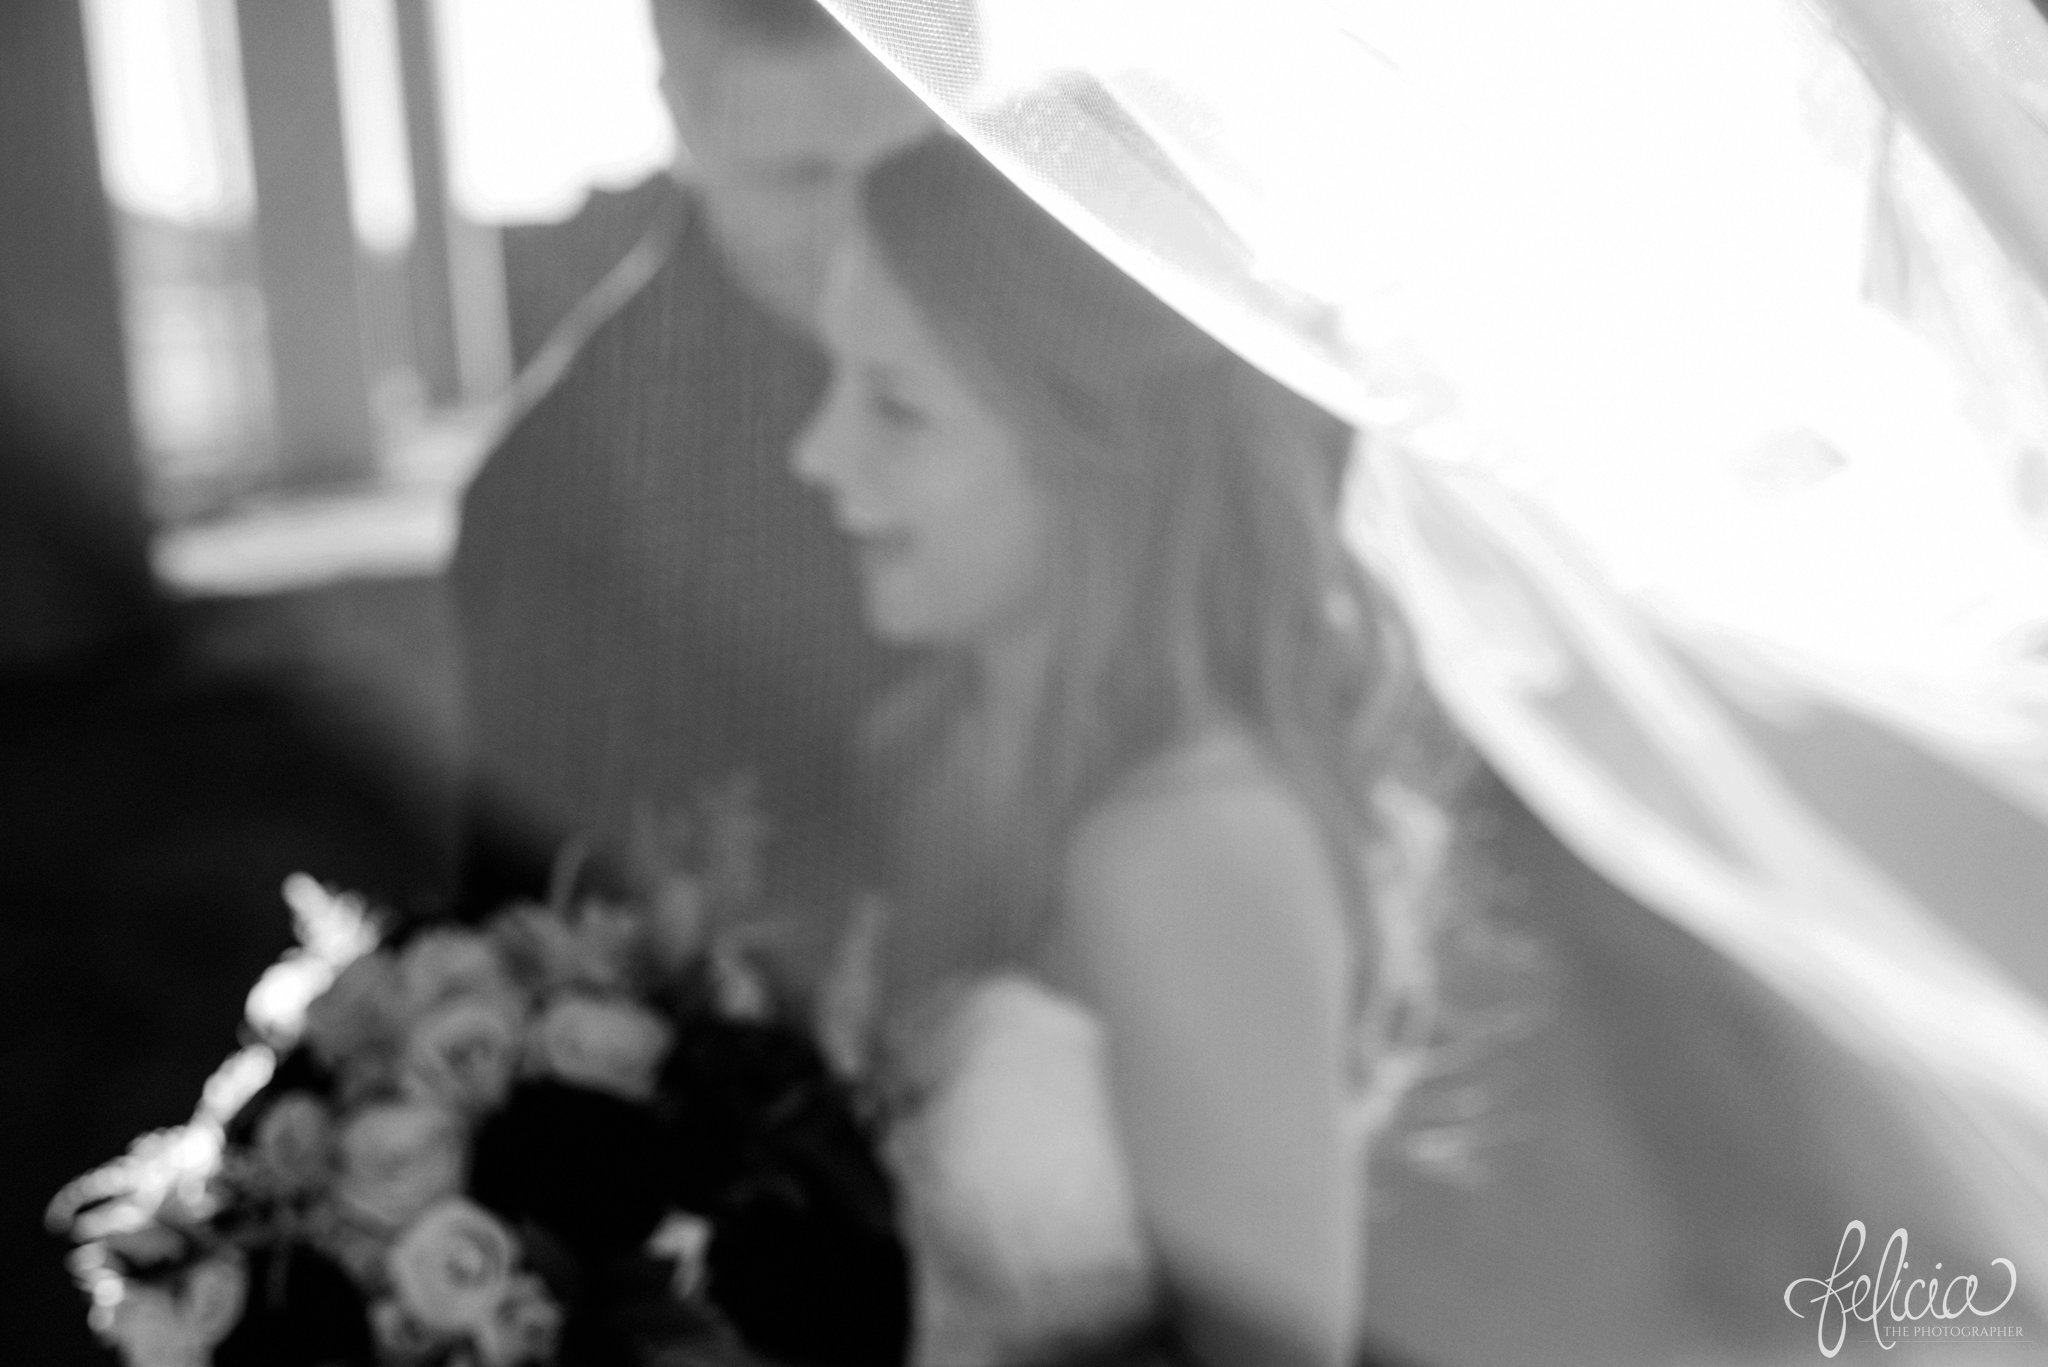 black and white | wedding | wedding photos | industrial | Rumely Event Space | wedding photography | images by feliciathephotographer.com | West Bottoms | industrial background | bride and groom portraits | bride silhouette | veil | unfocused | candid | laughing 